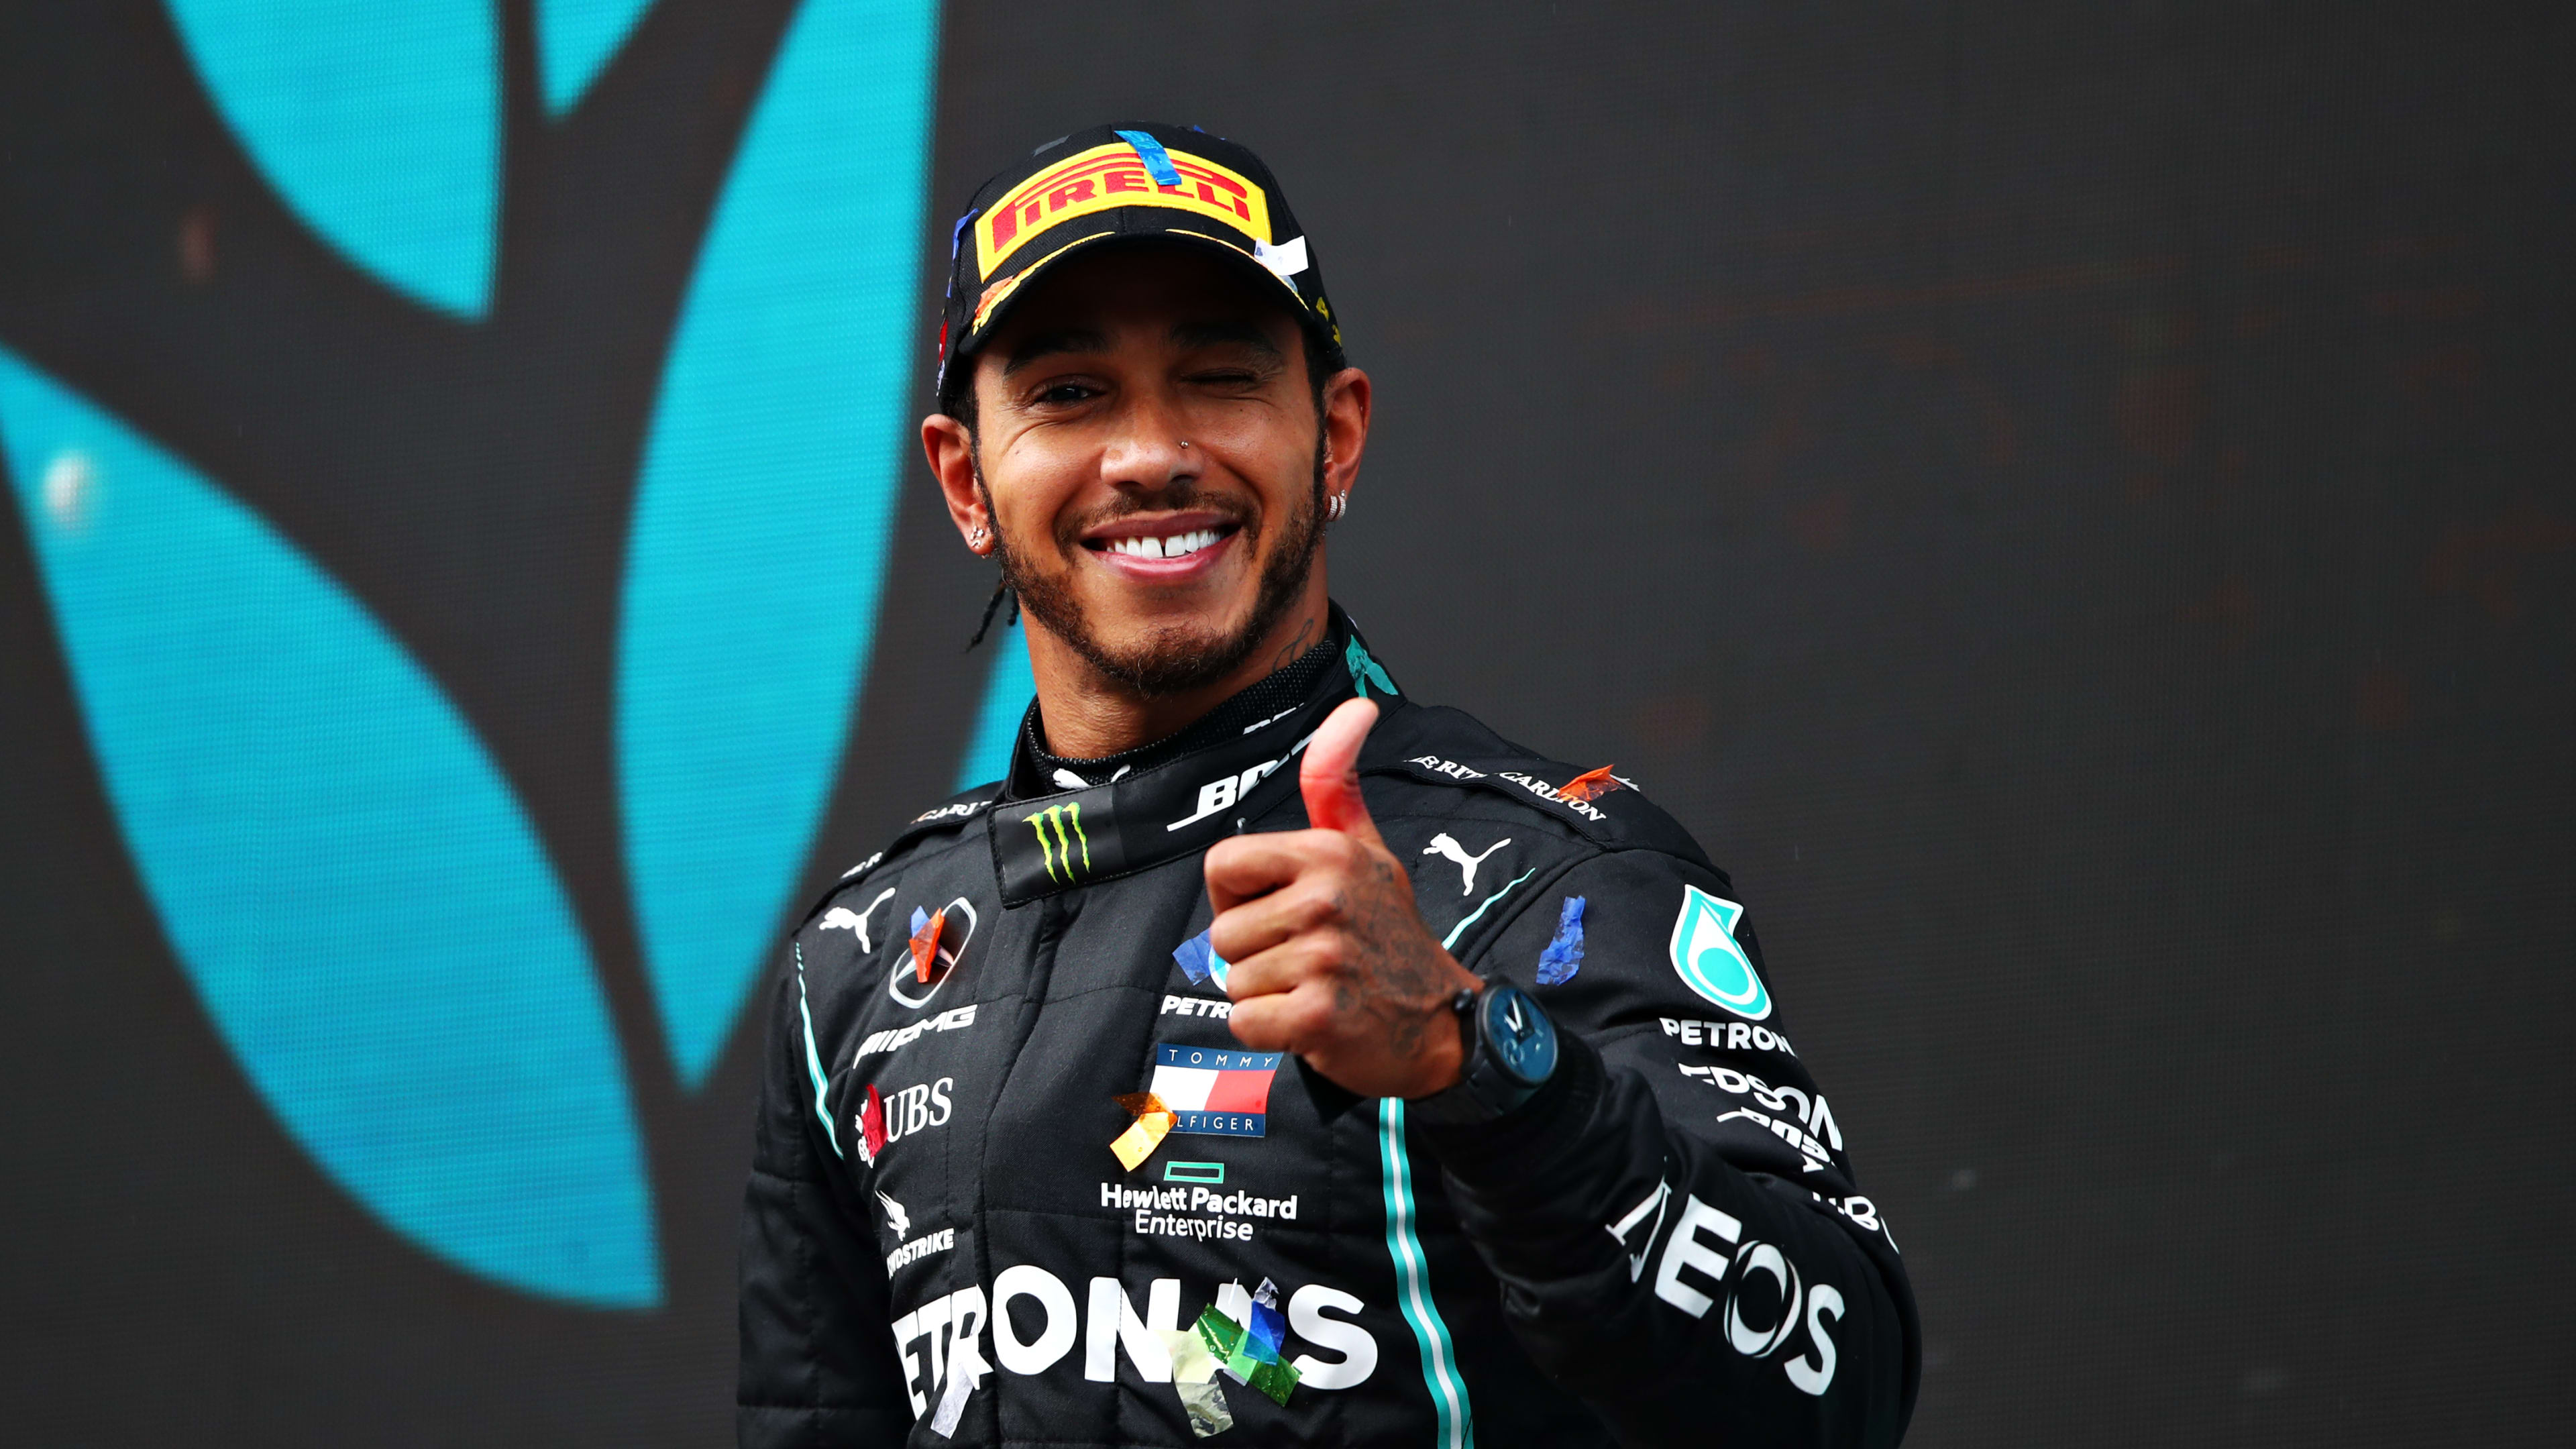 Stand on Sir Lewis!  Hamilton crowned knight after historic seventh world title